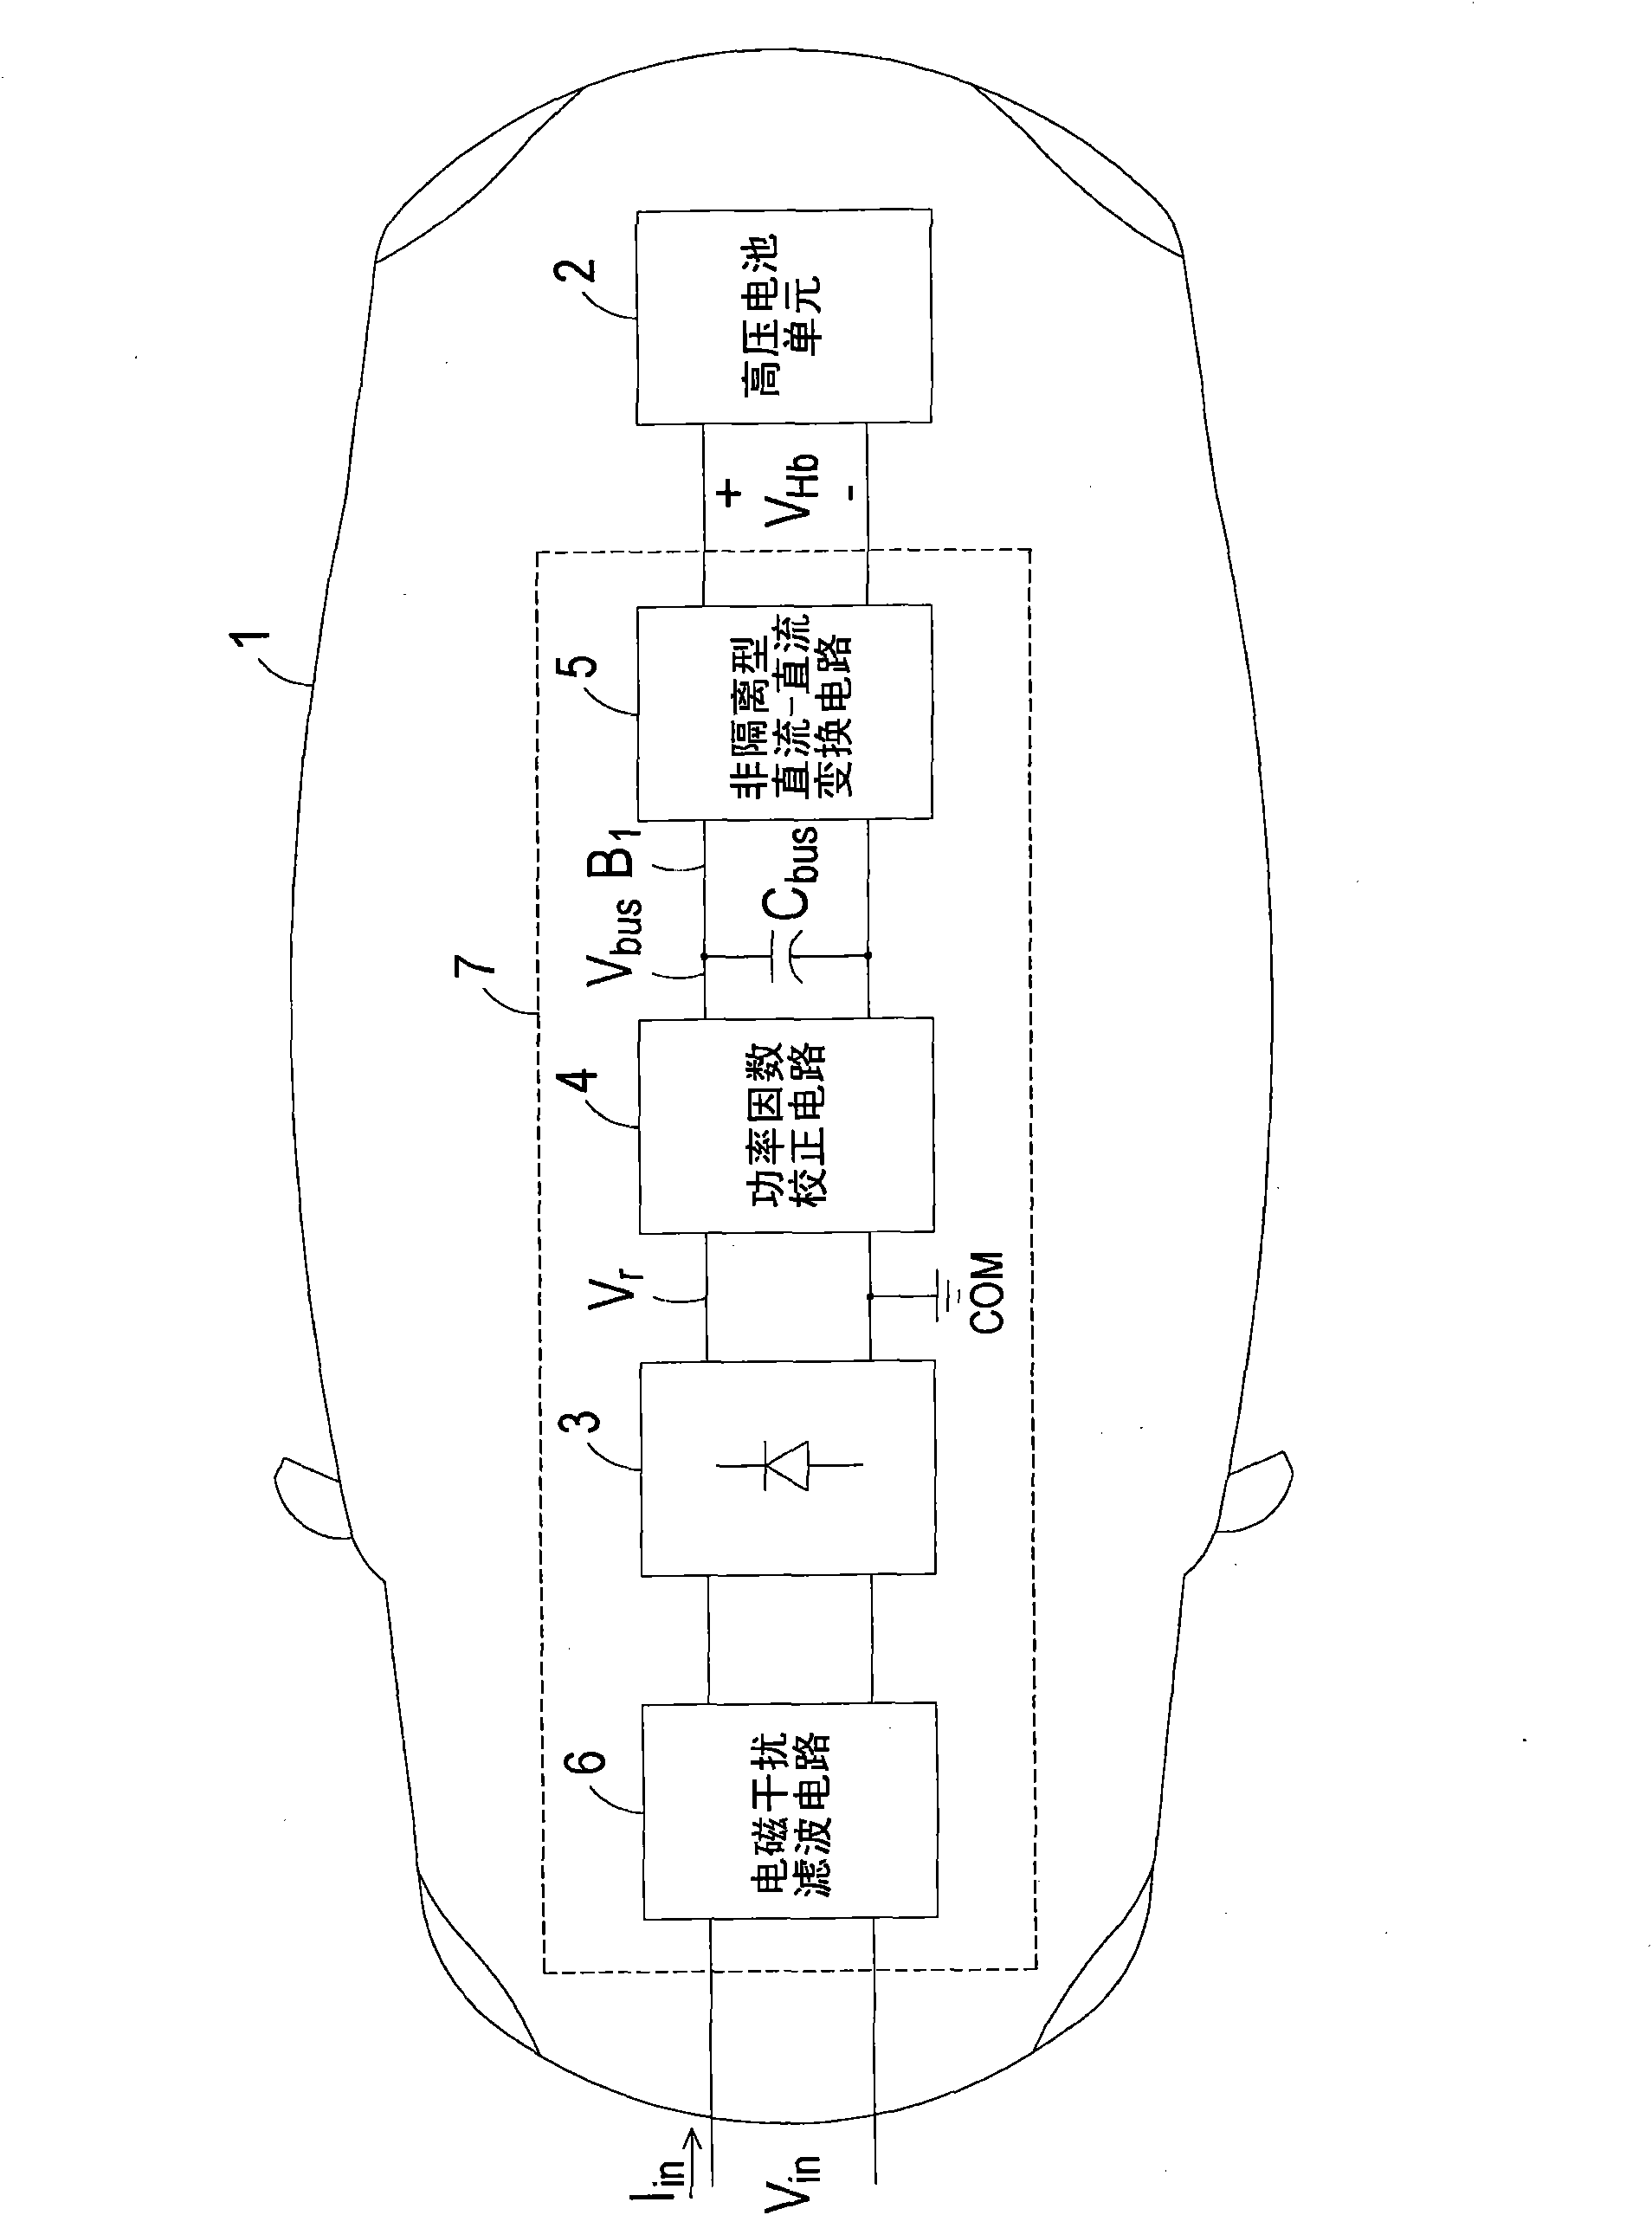 High-voltage battery charging system architecture of electric automobile